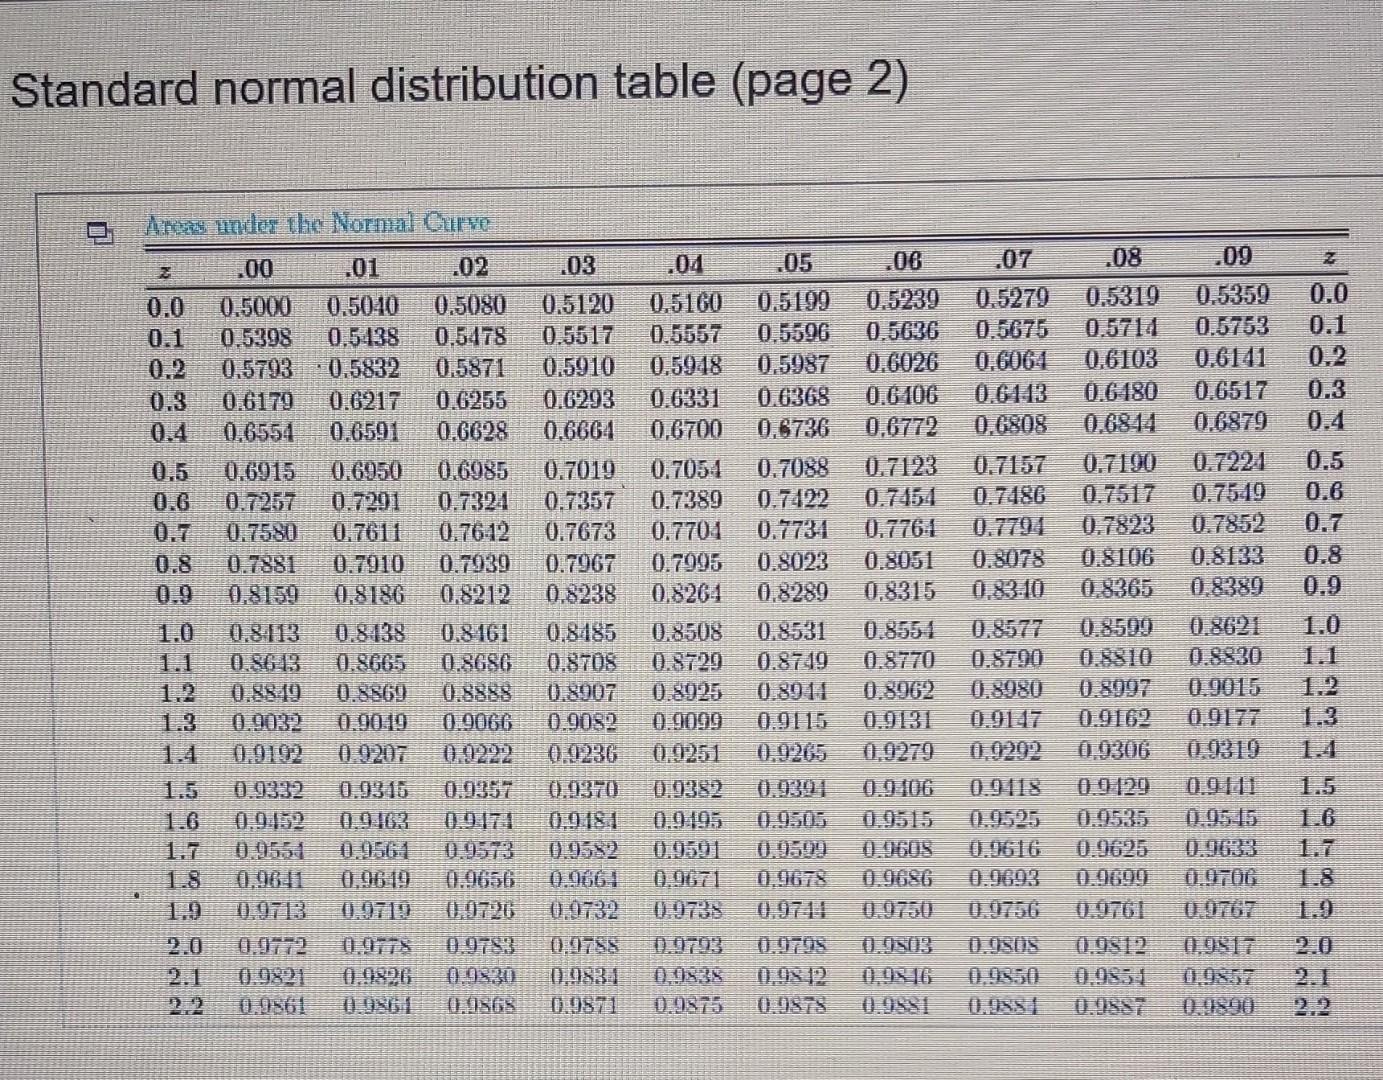 Solved Given a standard normal distribution, find the areas 